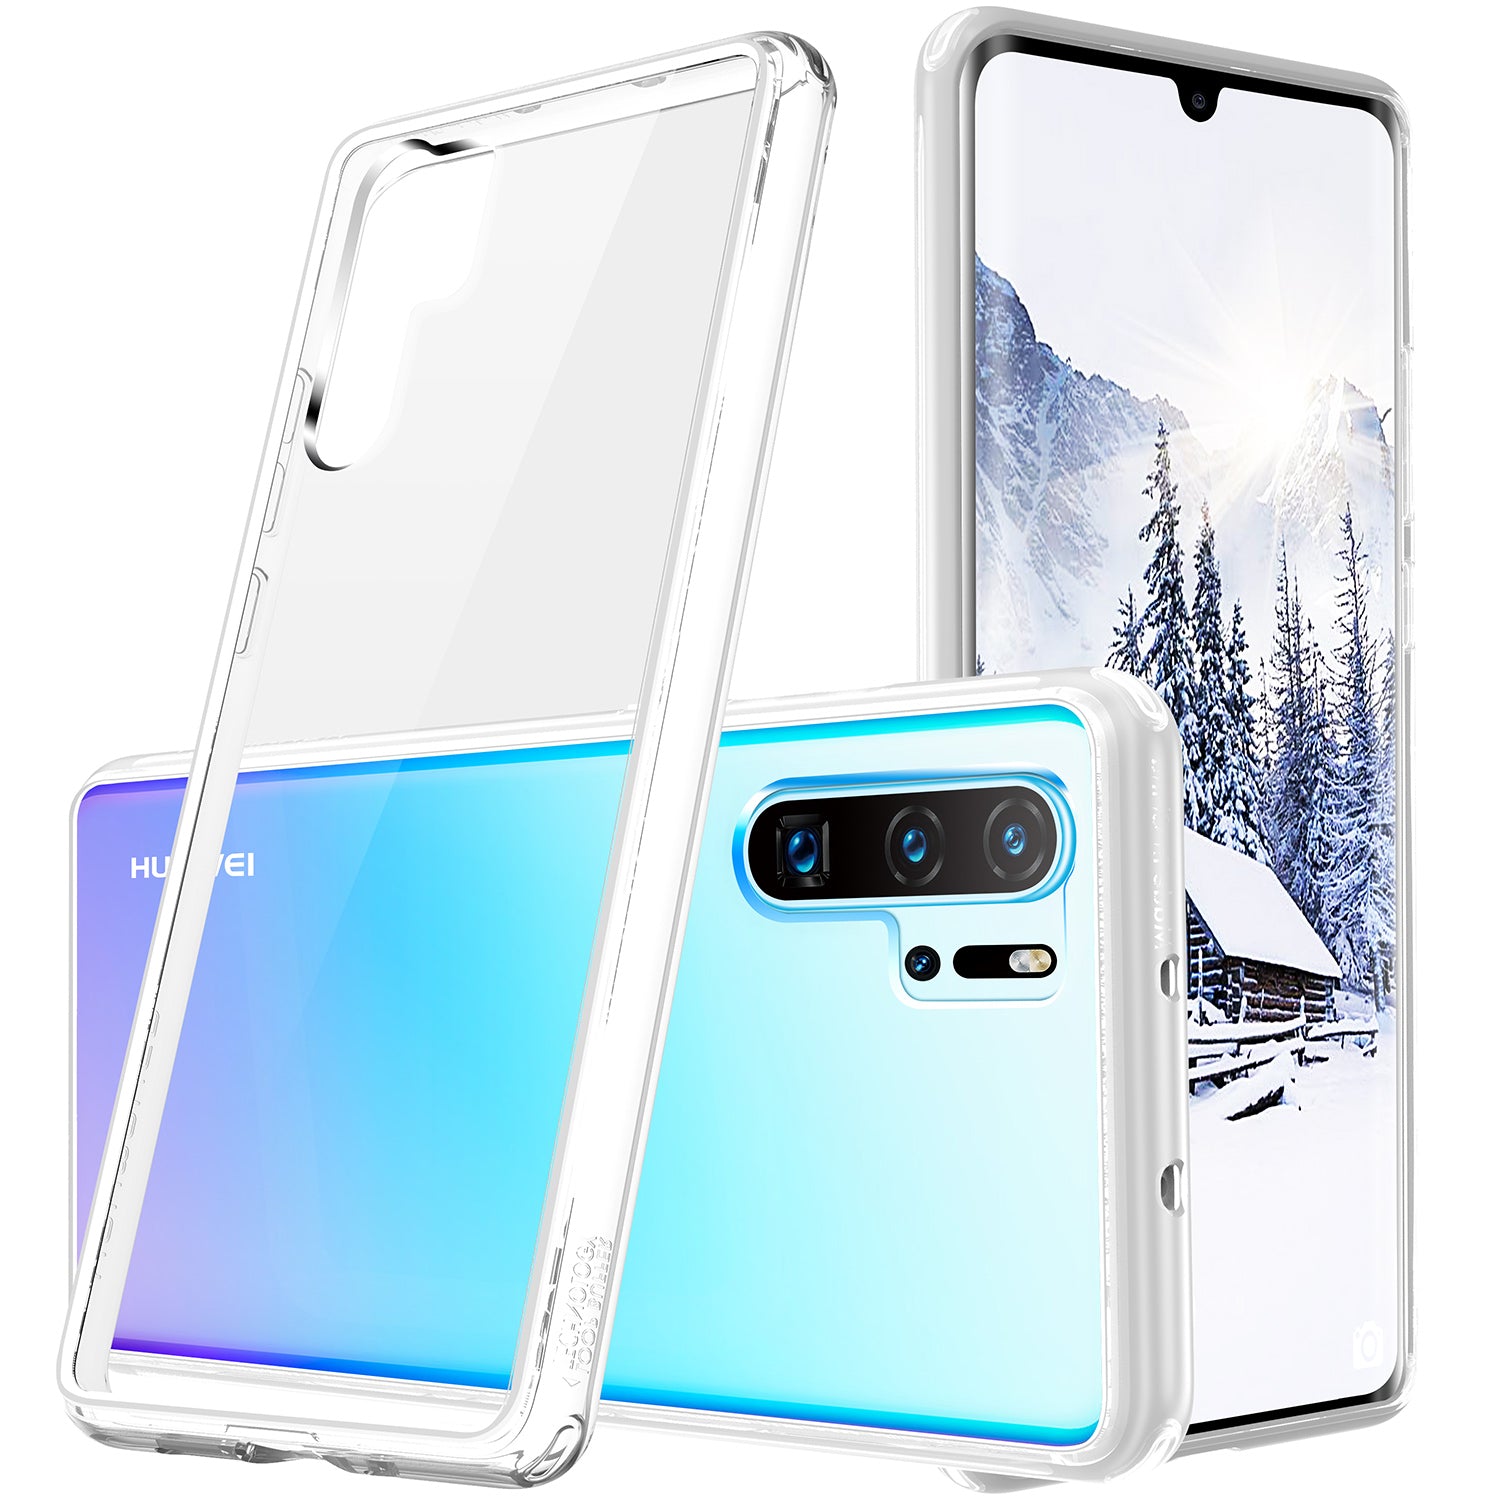 YOUMAKER® Huawei P30 Pro Shockproof Slim Bumper Crystal Case Cover-Clear